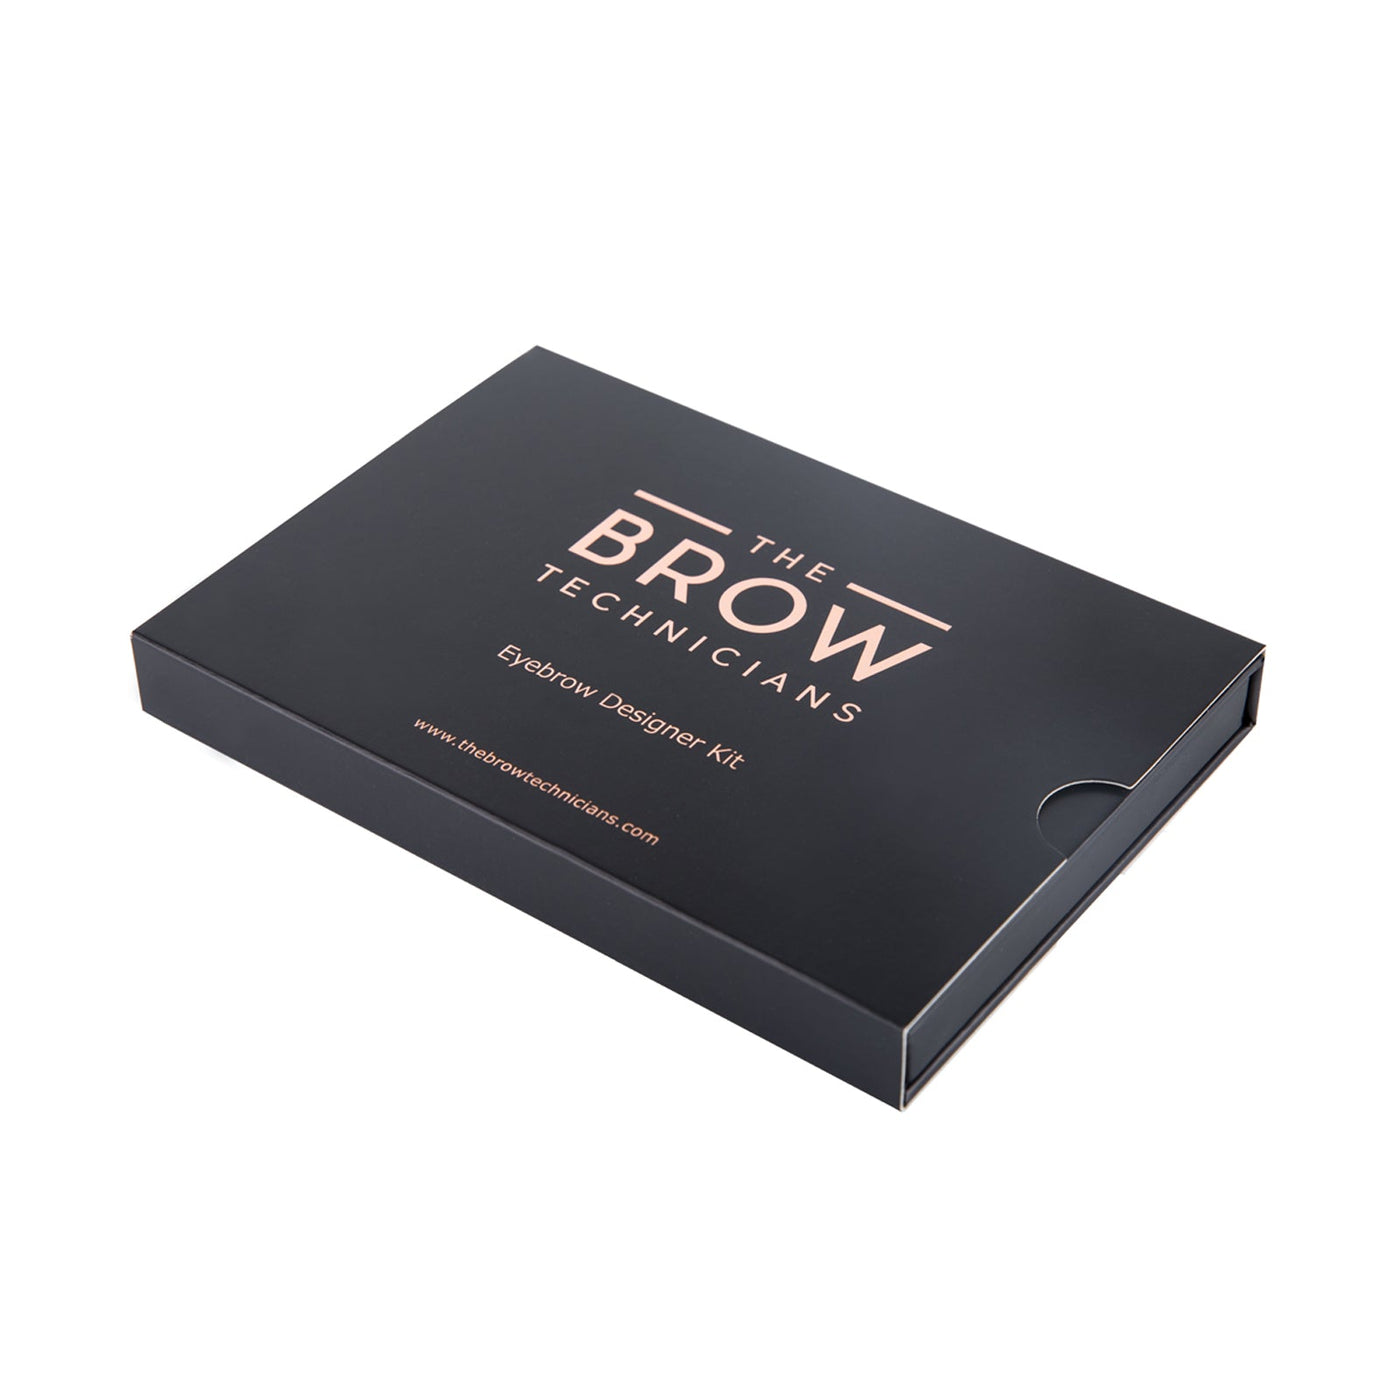 The Brow Technicians All-In-One Eyebrow Designer Kit